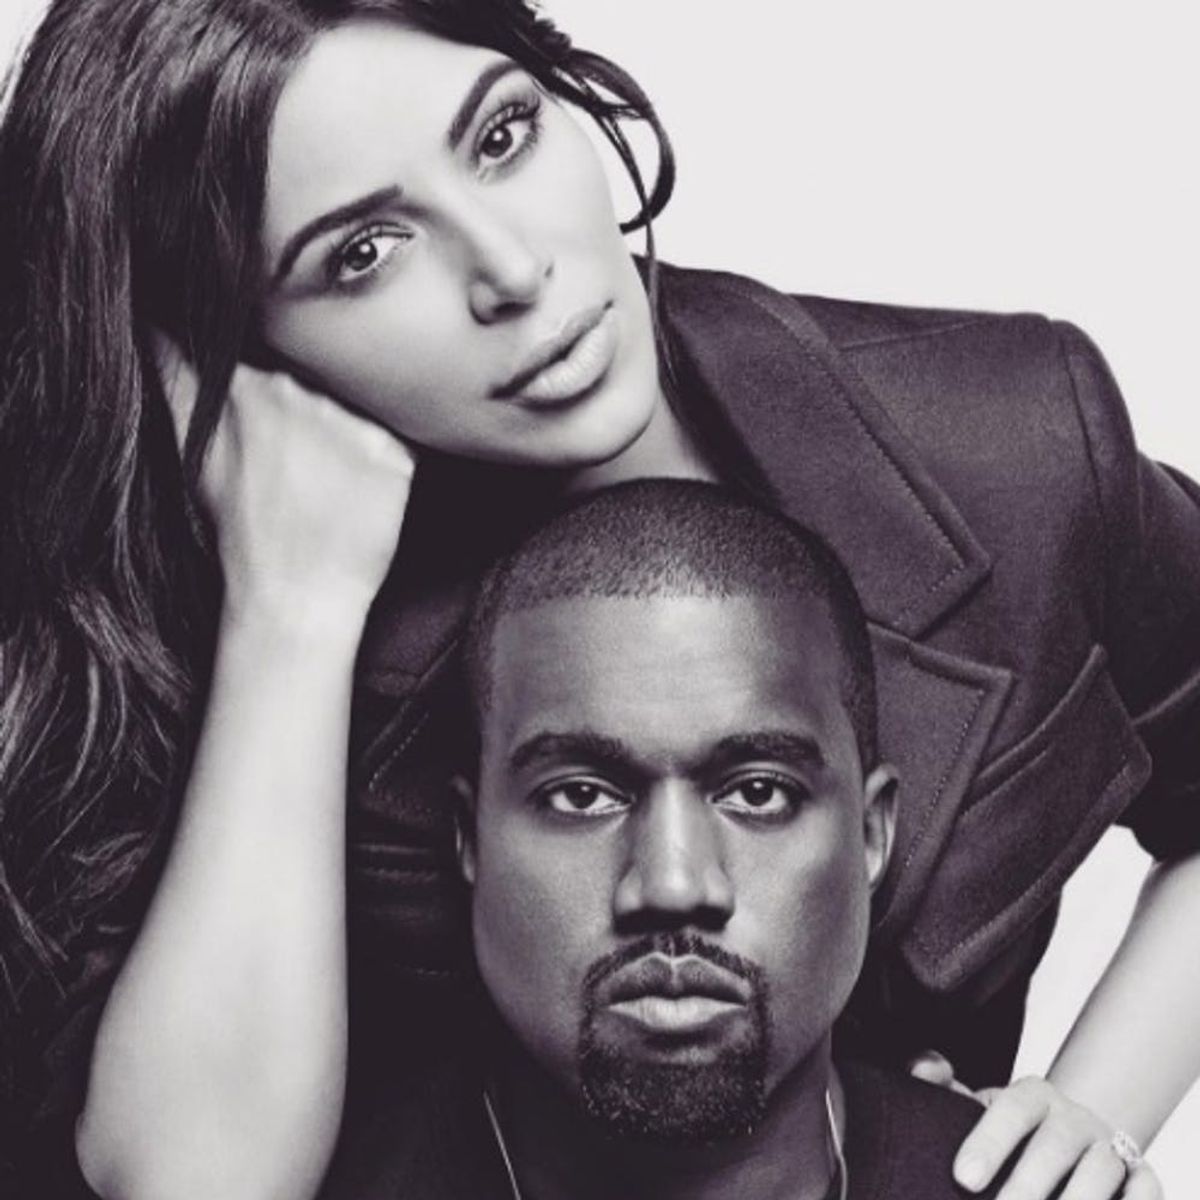 Kim K Is Reportedly Planning to Divorce Kanye